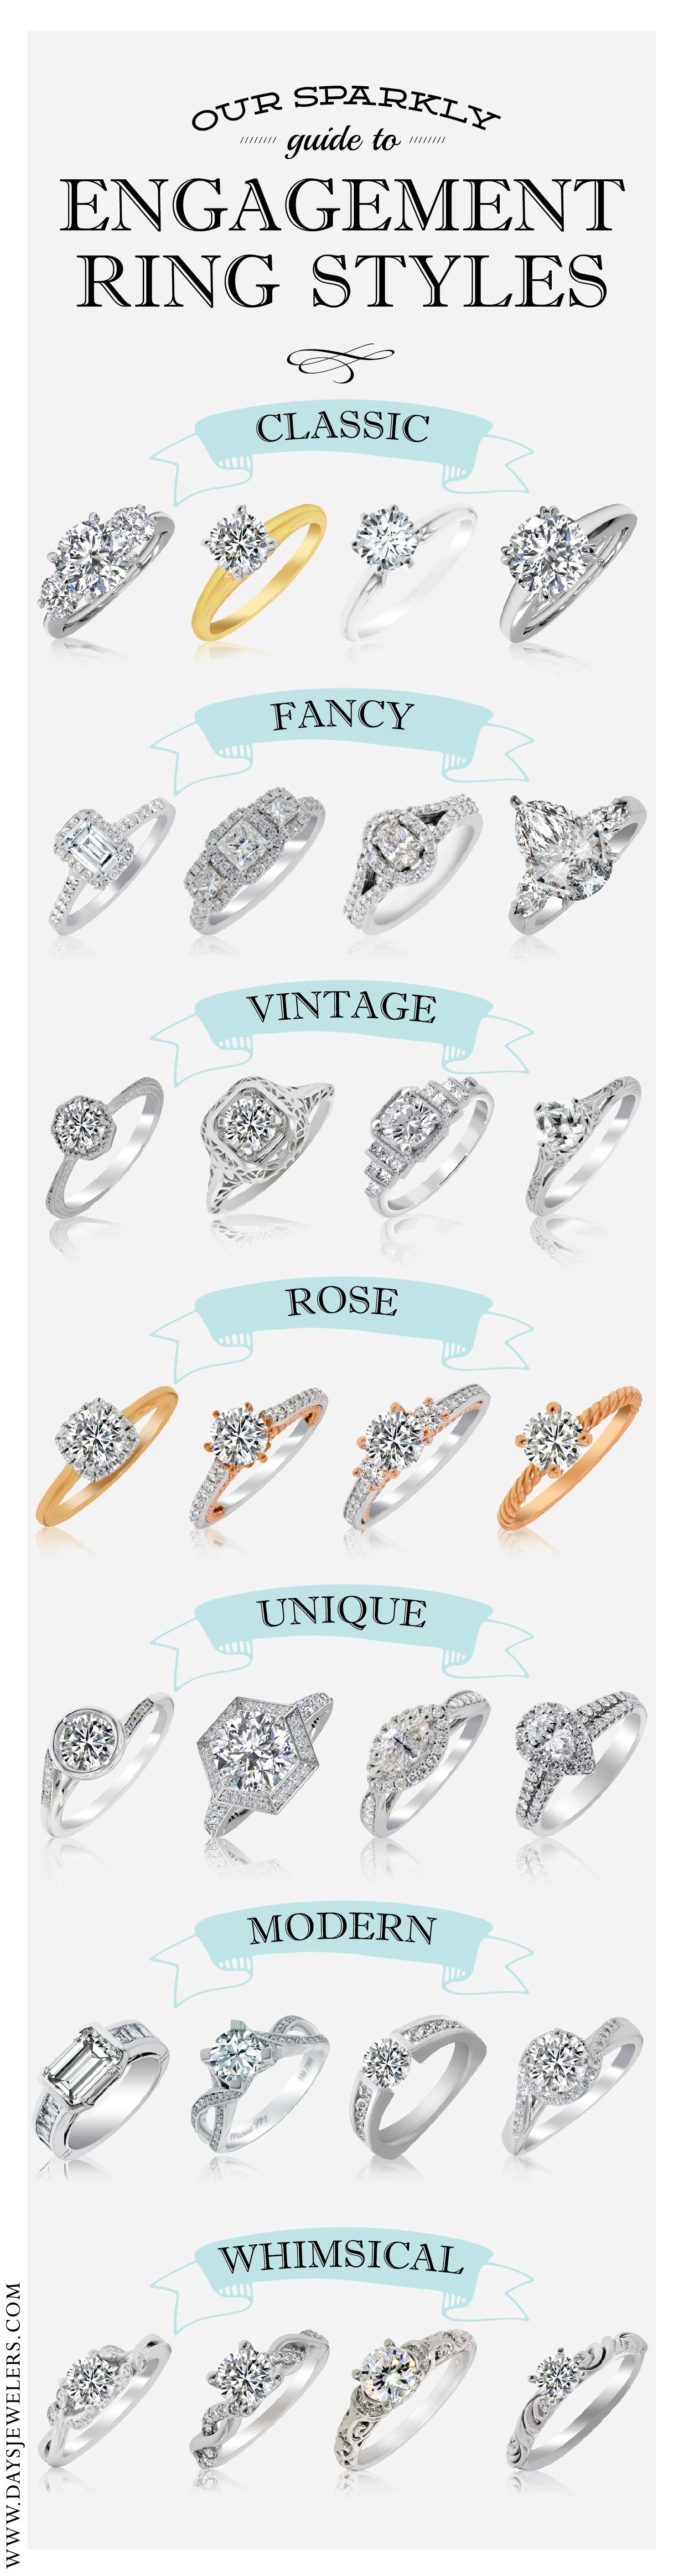 Engagement Ring Style Guide I Like The Classic Ones Engagement